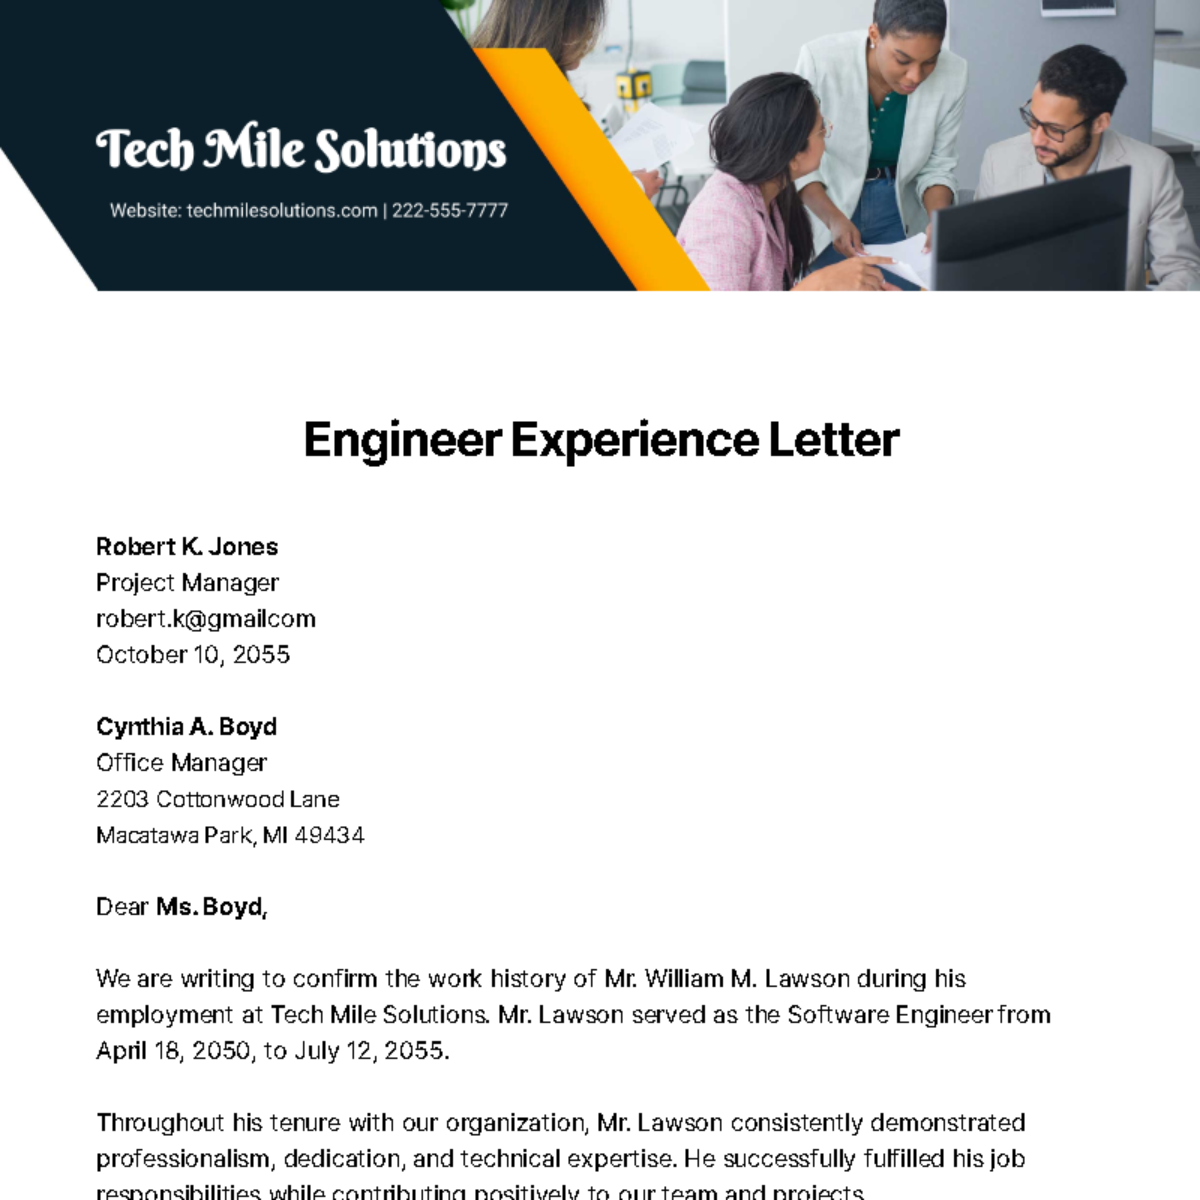 Engineer Experience Letter   Template